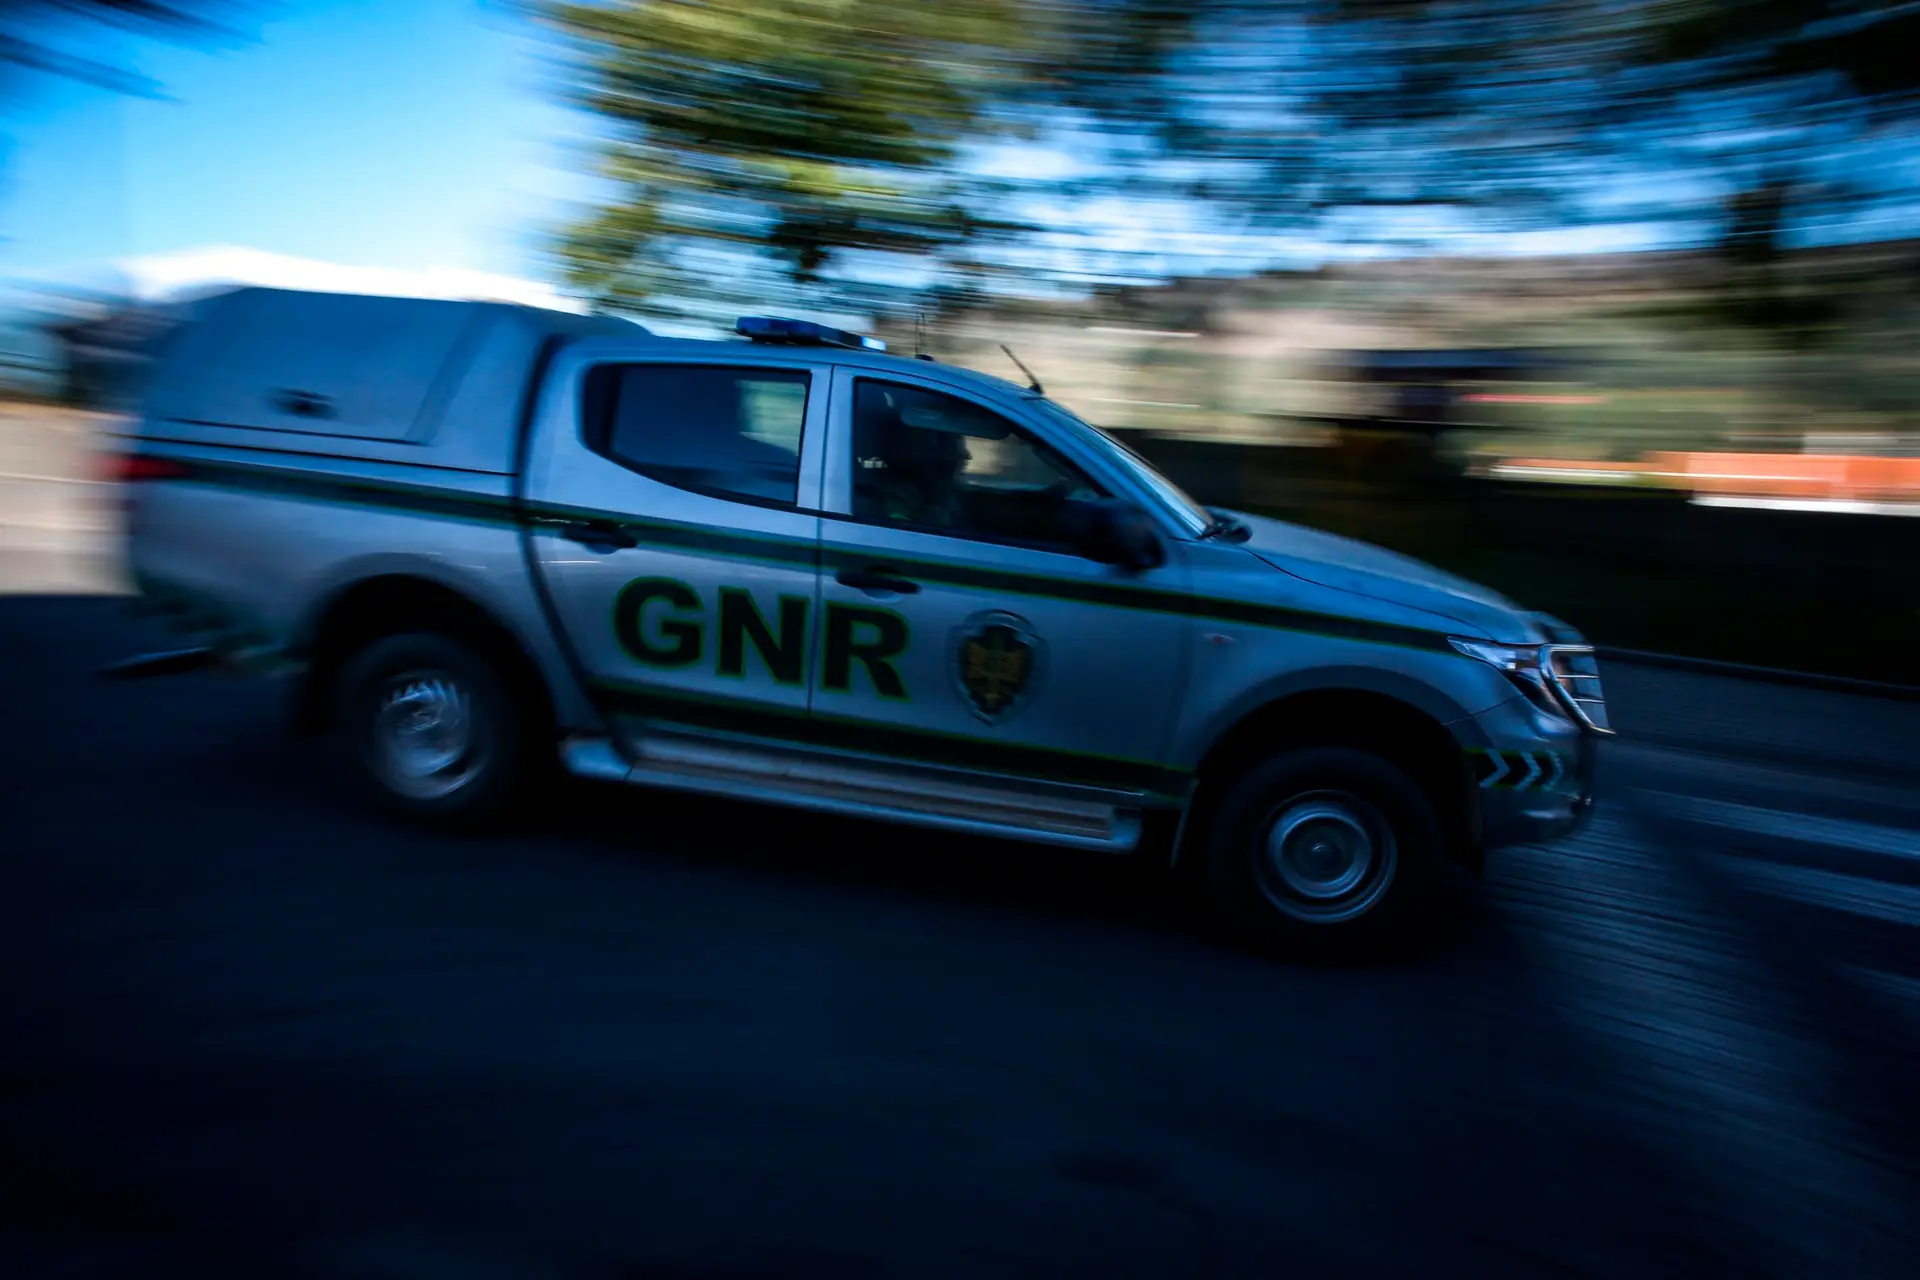 A Portuguese Guarda Nacional Republicana (GNR) police car drives to help combatting a wildfire close to Monchique in the Portuguese Algarve, on August 8, 2018. – Wildfires scorched across Portugal’s southern Algarve region today, threatening more villages as the country’s prime minister warned the blaze could burn for days before being brought under control. Over 1,400 firefighters and soldiers were battling the blaze around the mountain spa town of Monchique in one of Europe’s top tourist destinations. (Photo by CARLOS COSTA / AFP) (Photo by CARLOS COSTA/AFP via Getty Images)